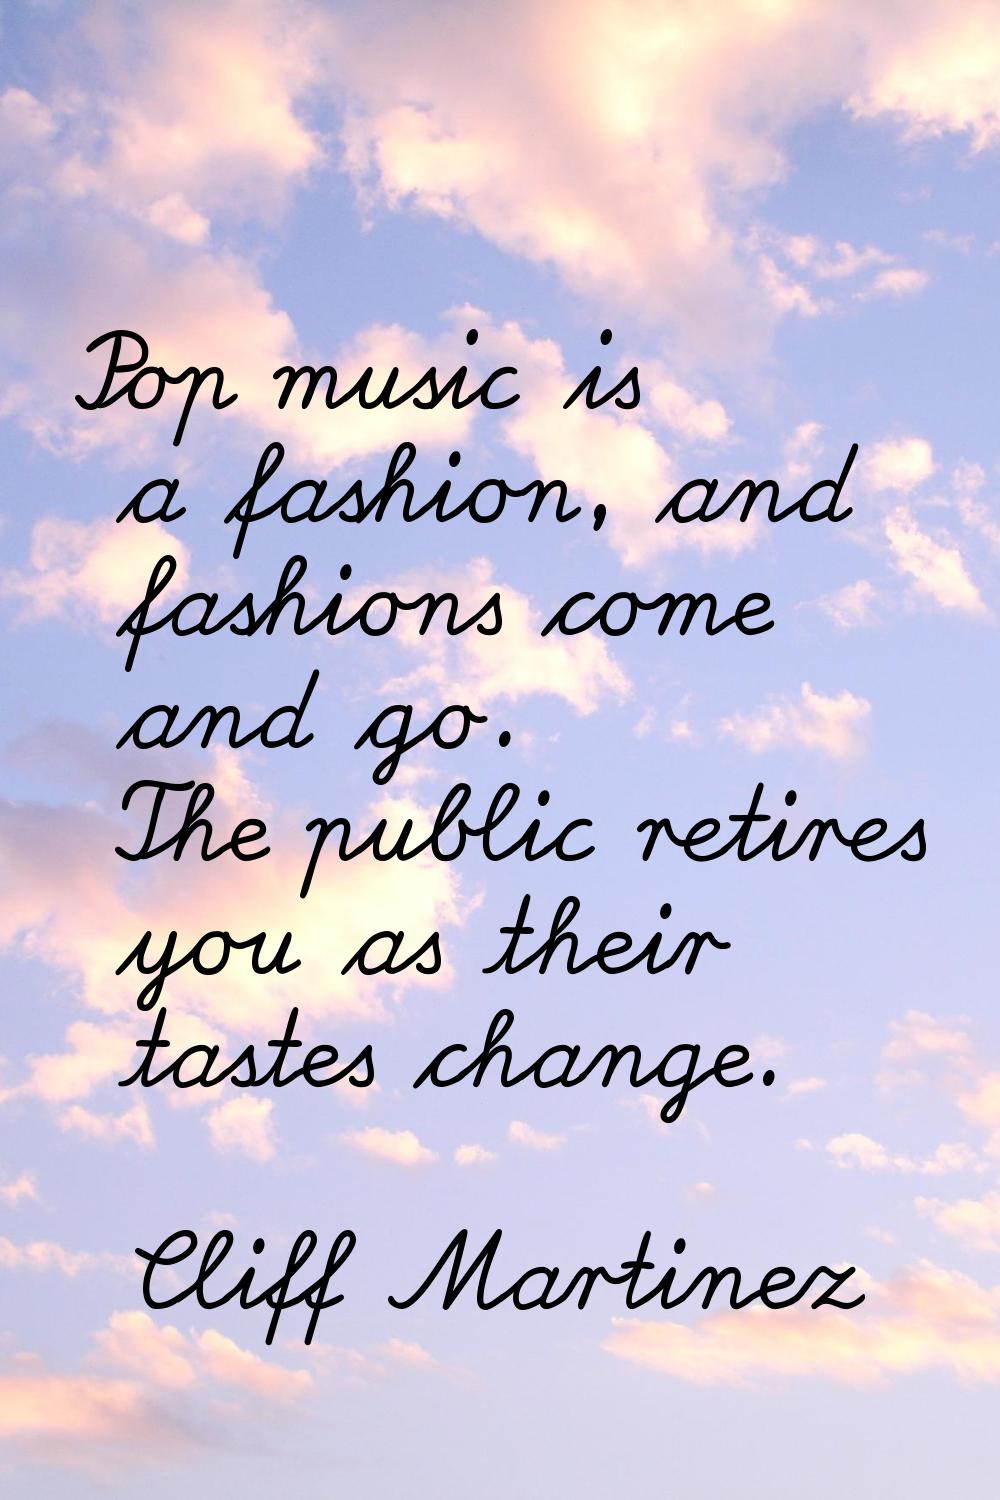 Pop music is a fashion, and fashions come and go. The public retires you as their tastes change.